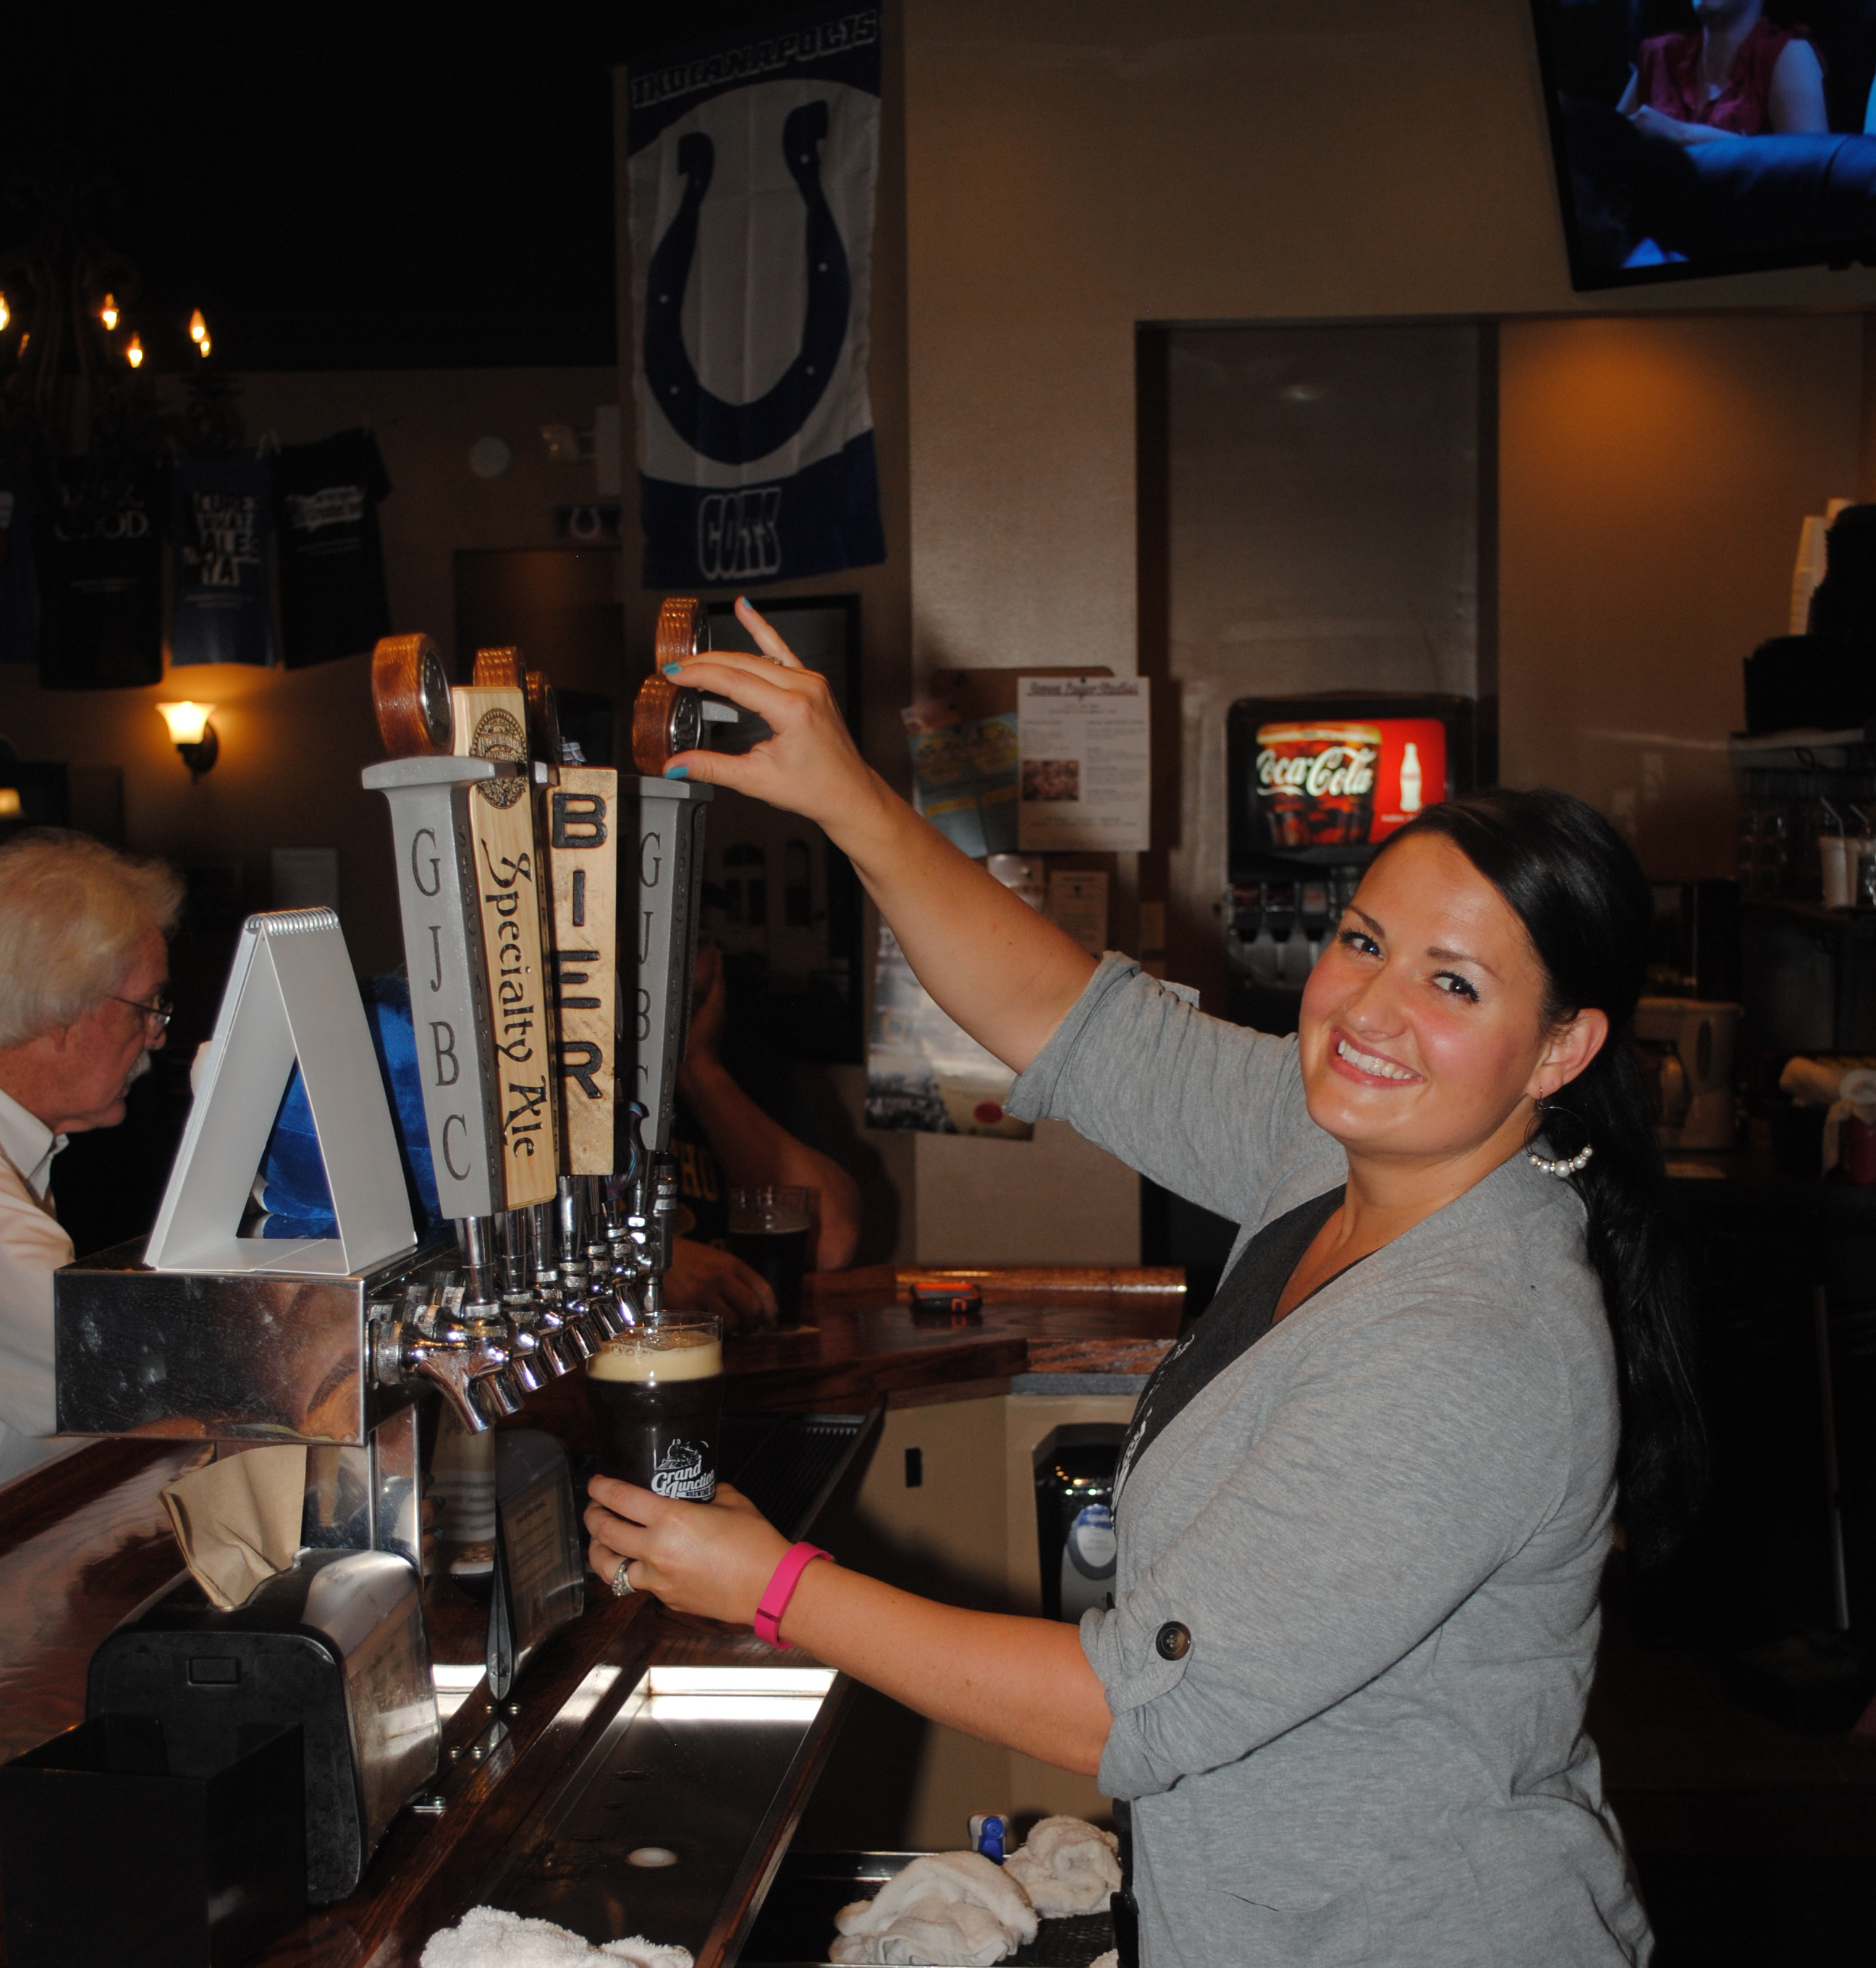 Rachel Cochran pours a pint of Westfield-produced beer at Grand Junction Brewing Co. The business, which started this spring, is the first recipient of the Spark Award since 2006. (Photo by Robert Herrington)